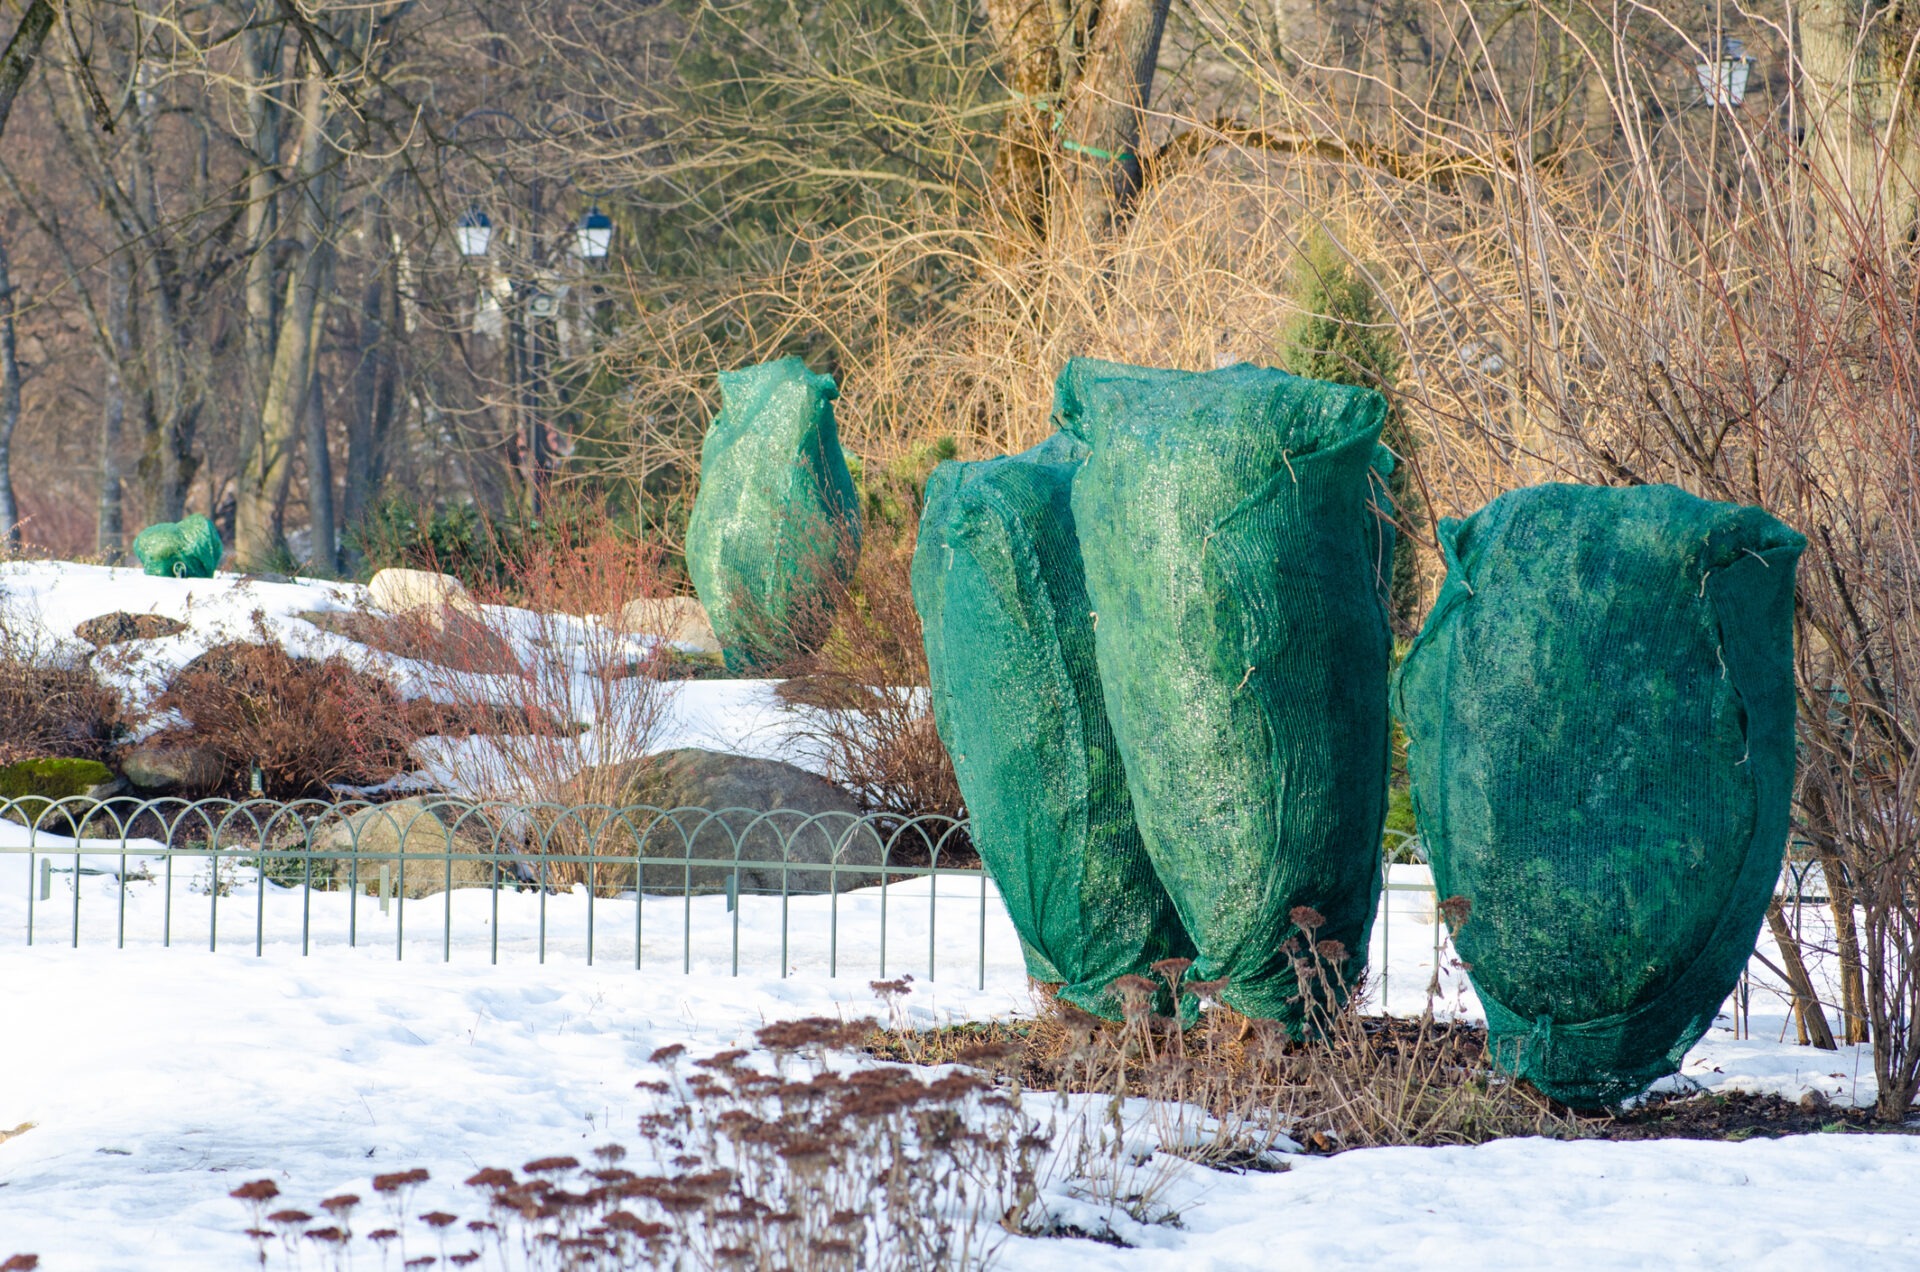 Three large green sculptures resembling wrapped botanical elements stand in a snow-dusted park with leafless trees and a metal fence in the background.